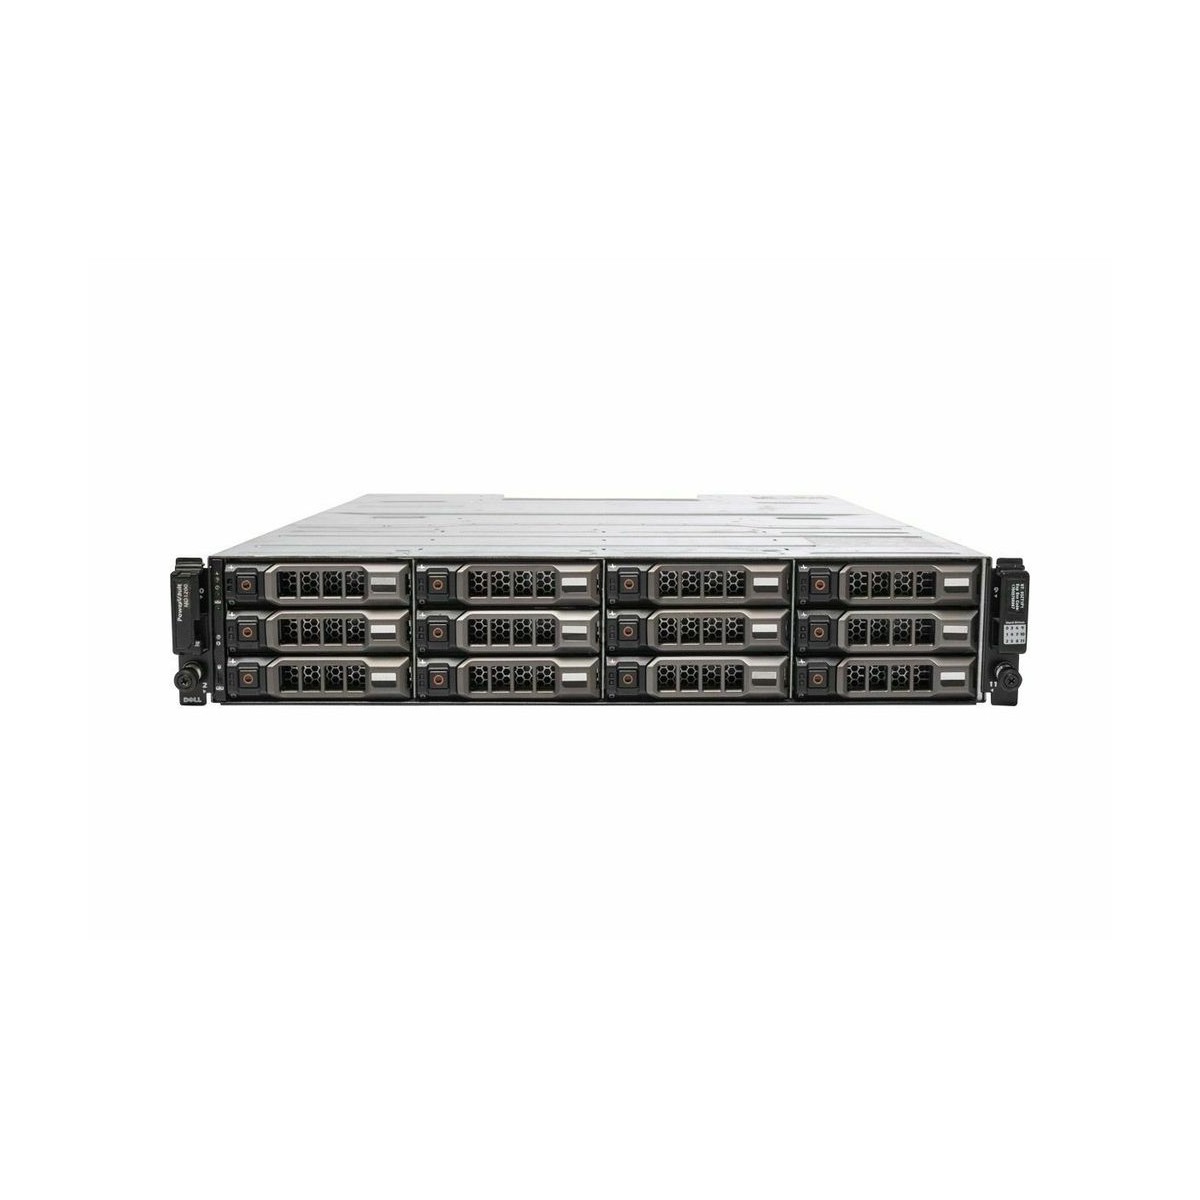 DELL POWERVAULT MD1200 NA 12x3,5 HDD 2xPSU 2xEMM